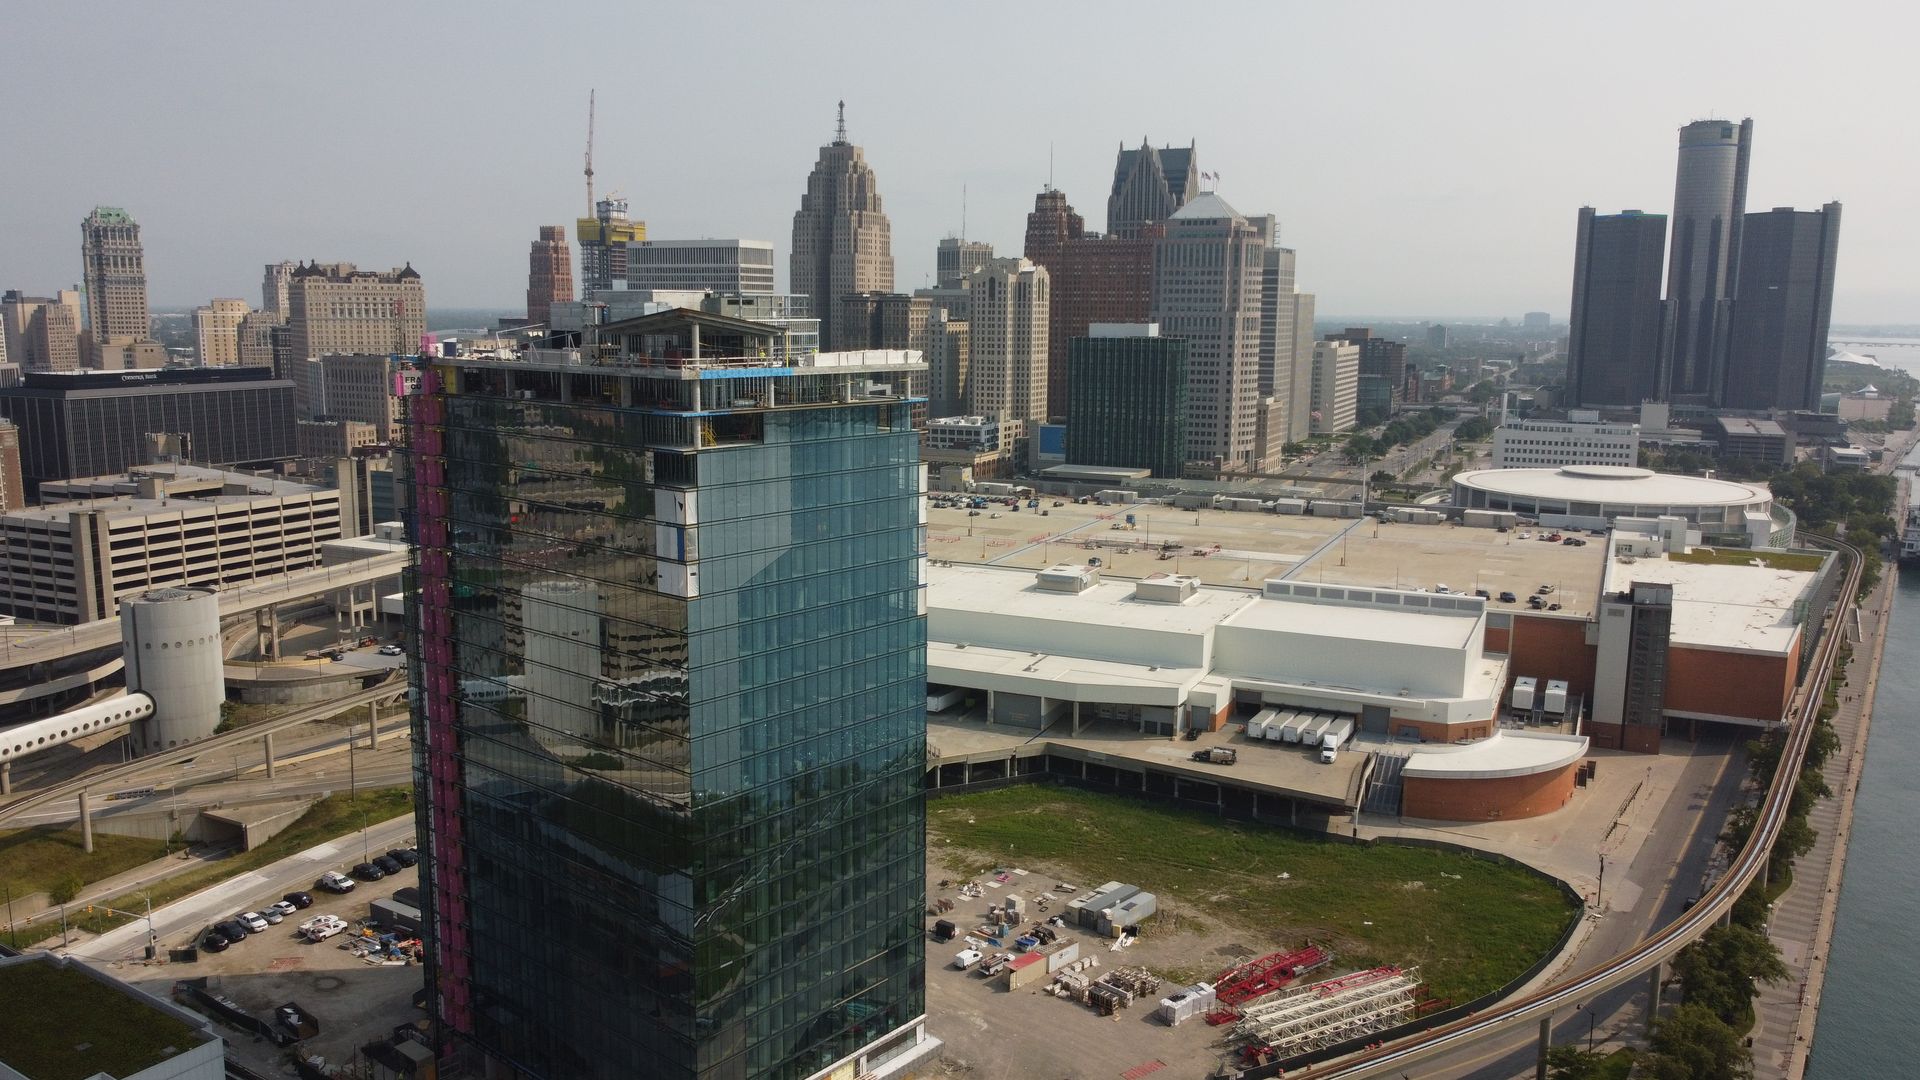 Leasing opens for riverfront residences at former Joe Louis Arena site